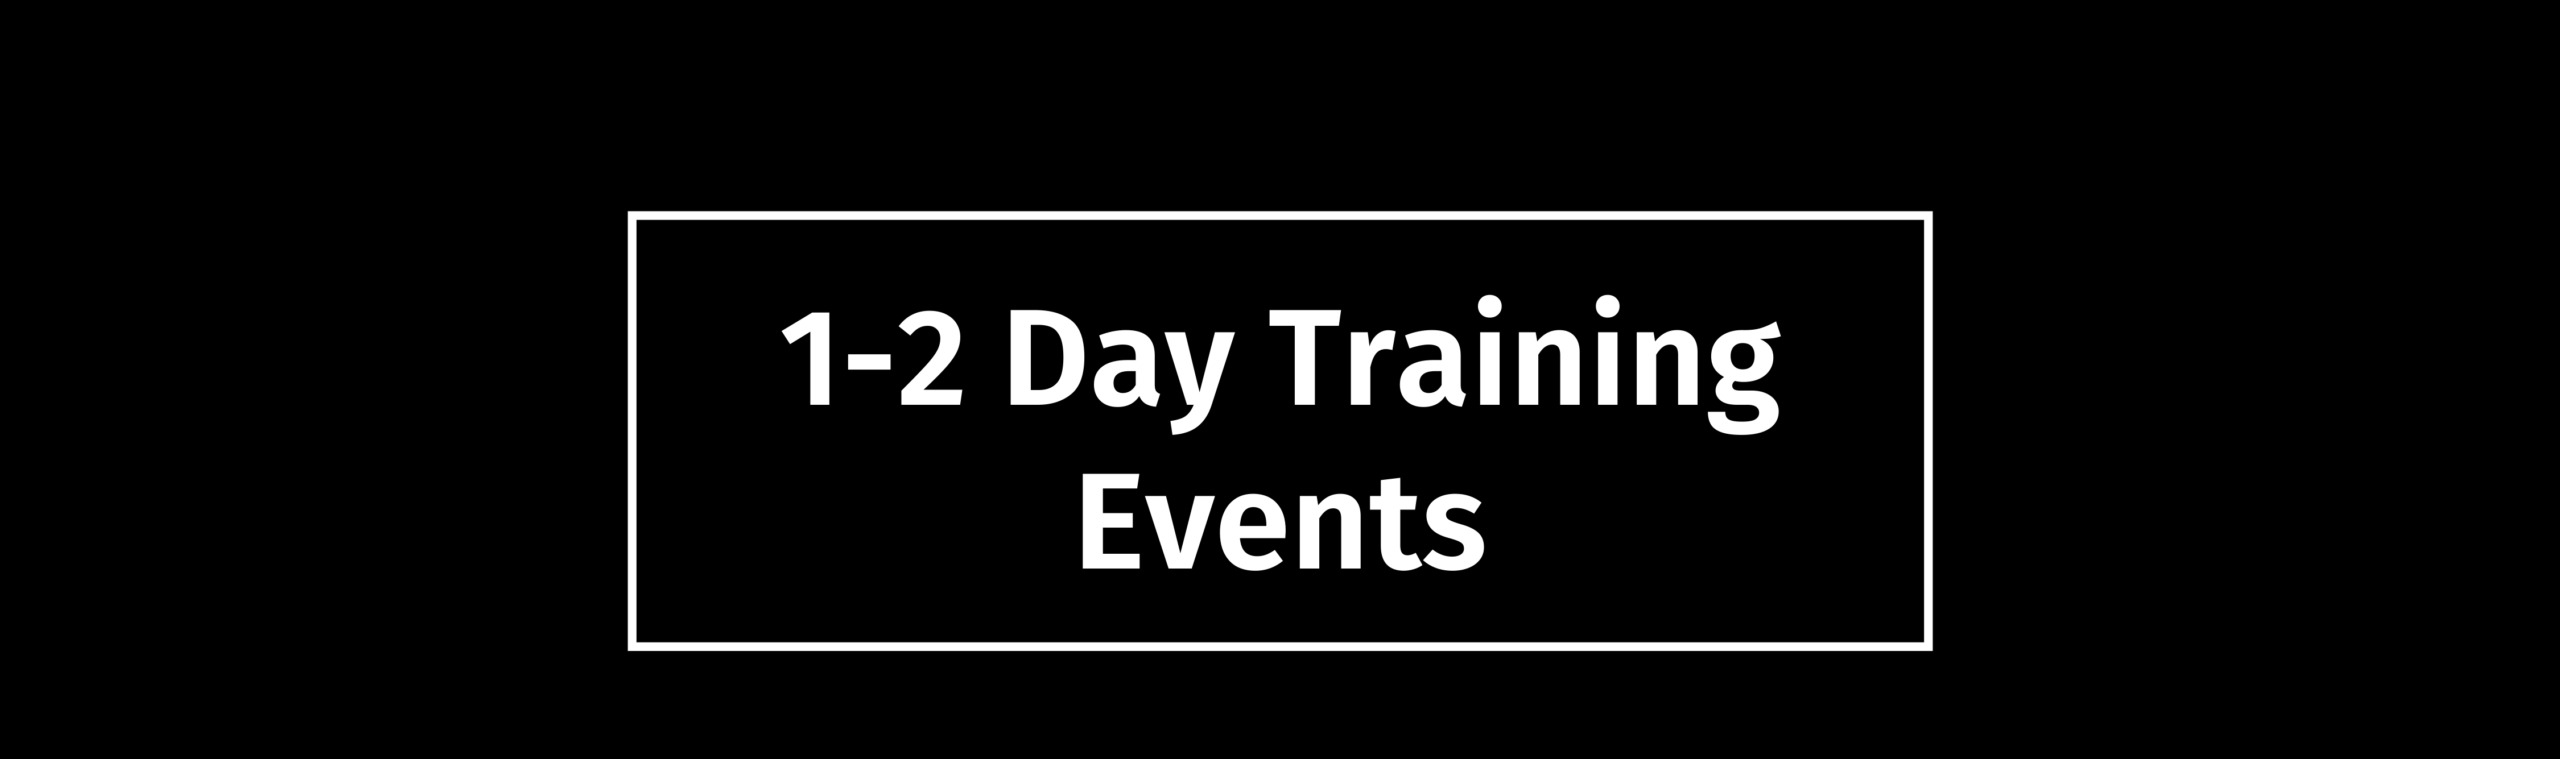 Page title: 1-2 day training events